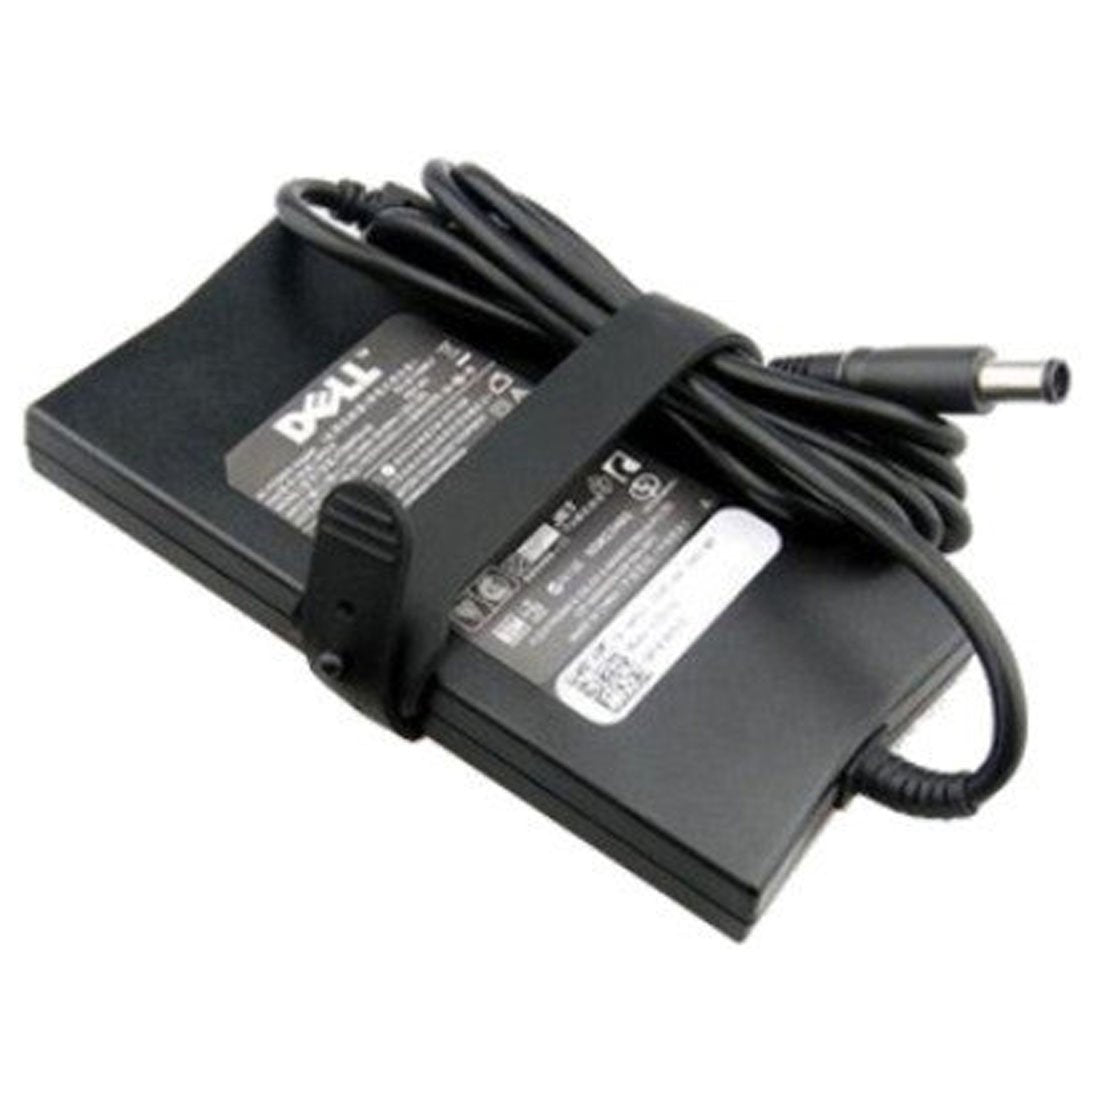 Dell Original 130W 19.5V 7.4mm Pin Laptop Charger Adapter for Latitude E6410 With Power Cord